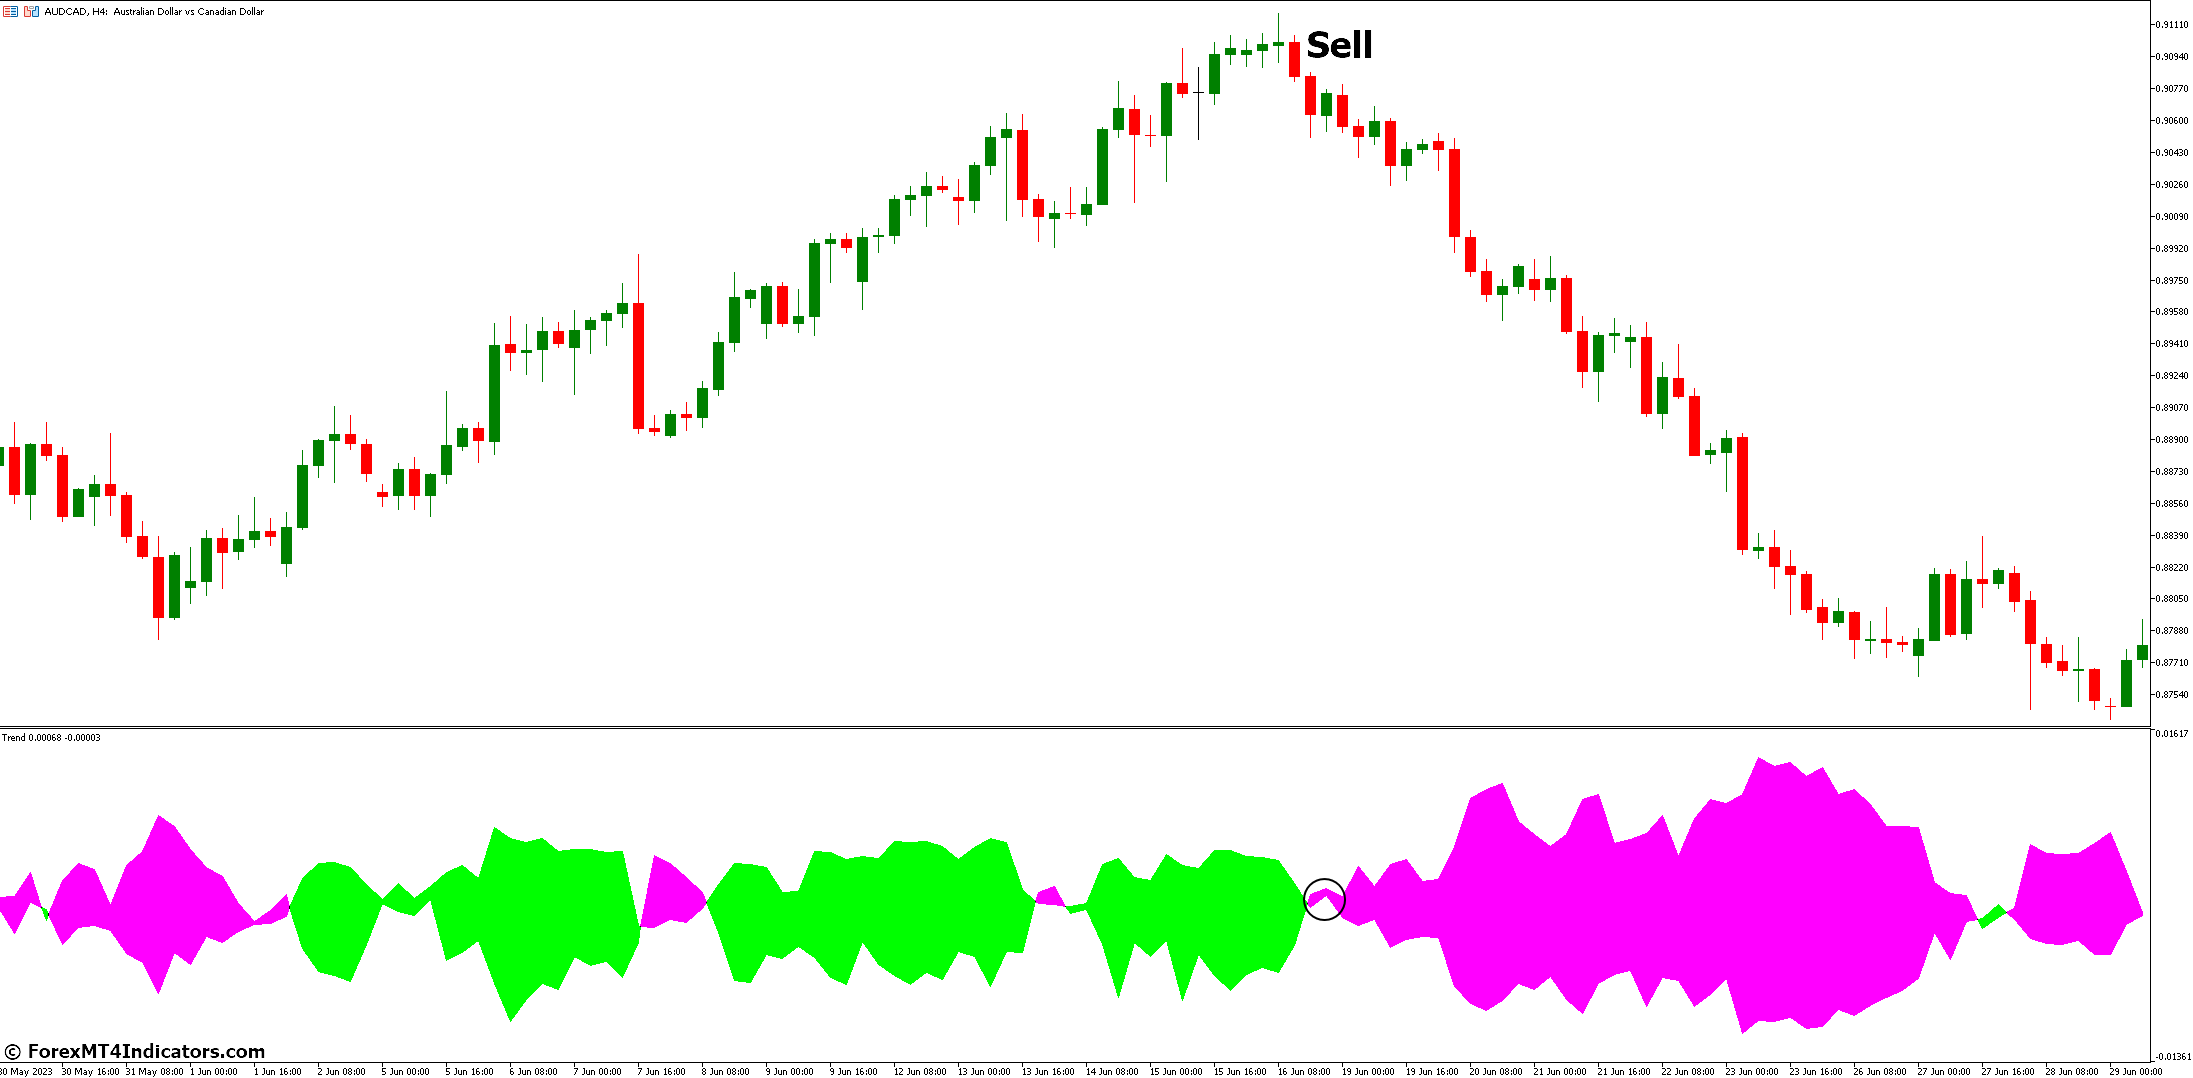 How to Trade with Trend Indicator - Sell Entry